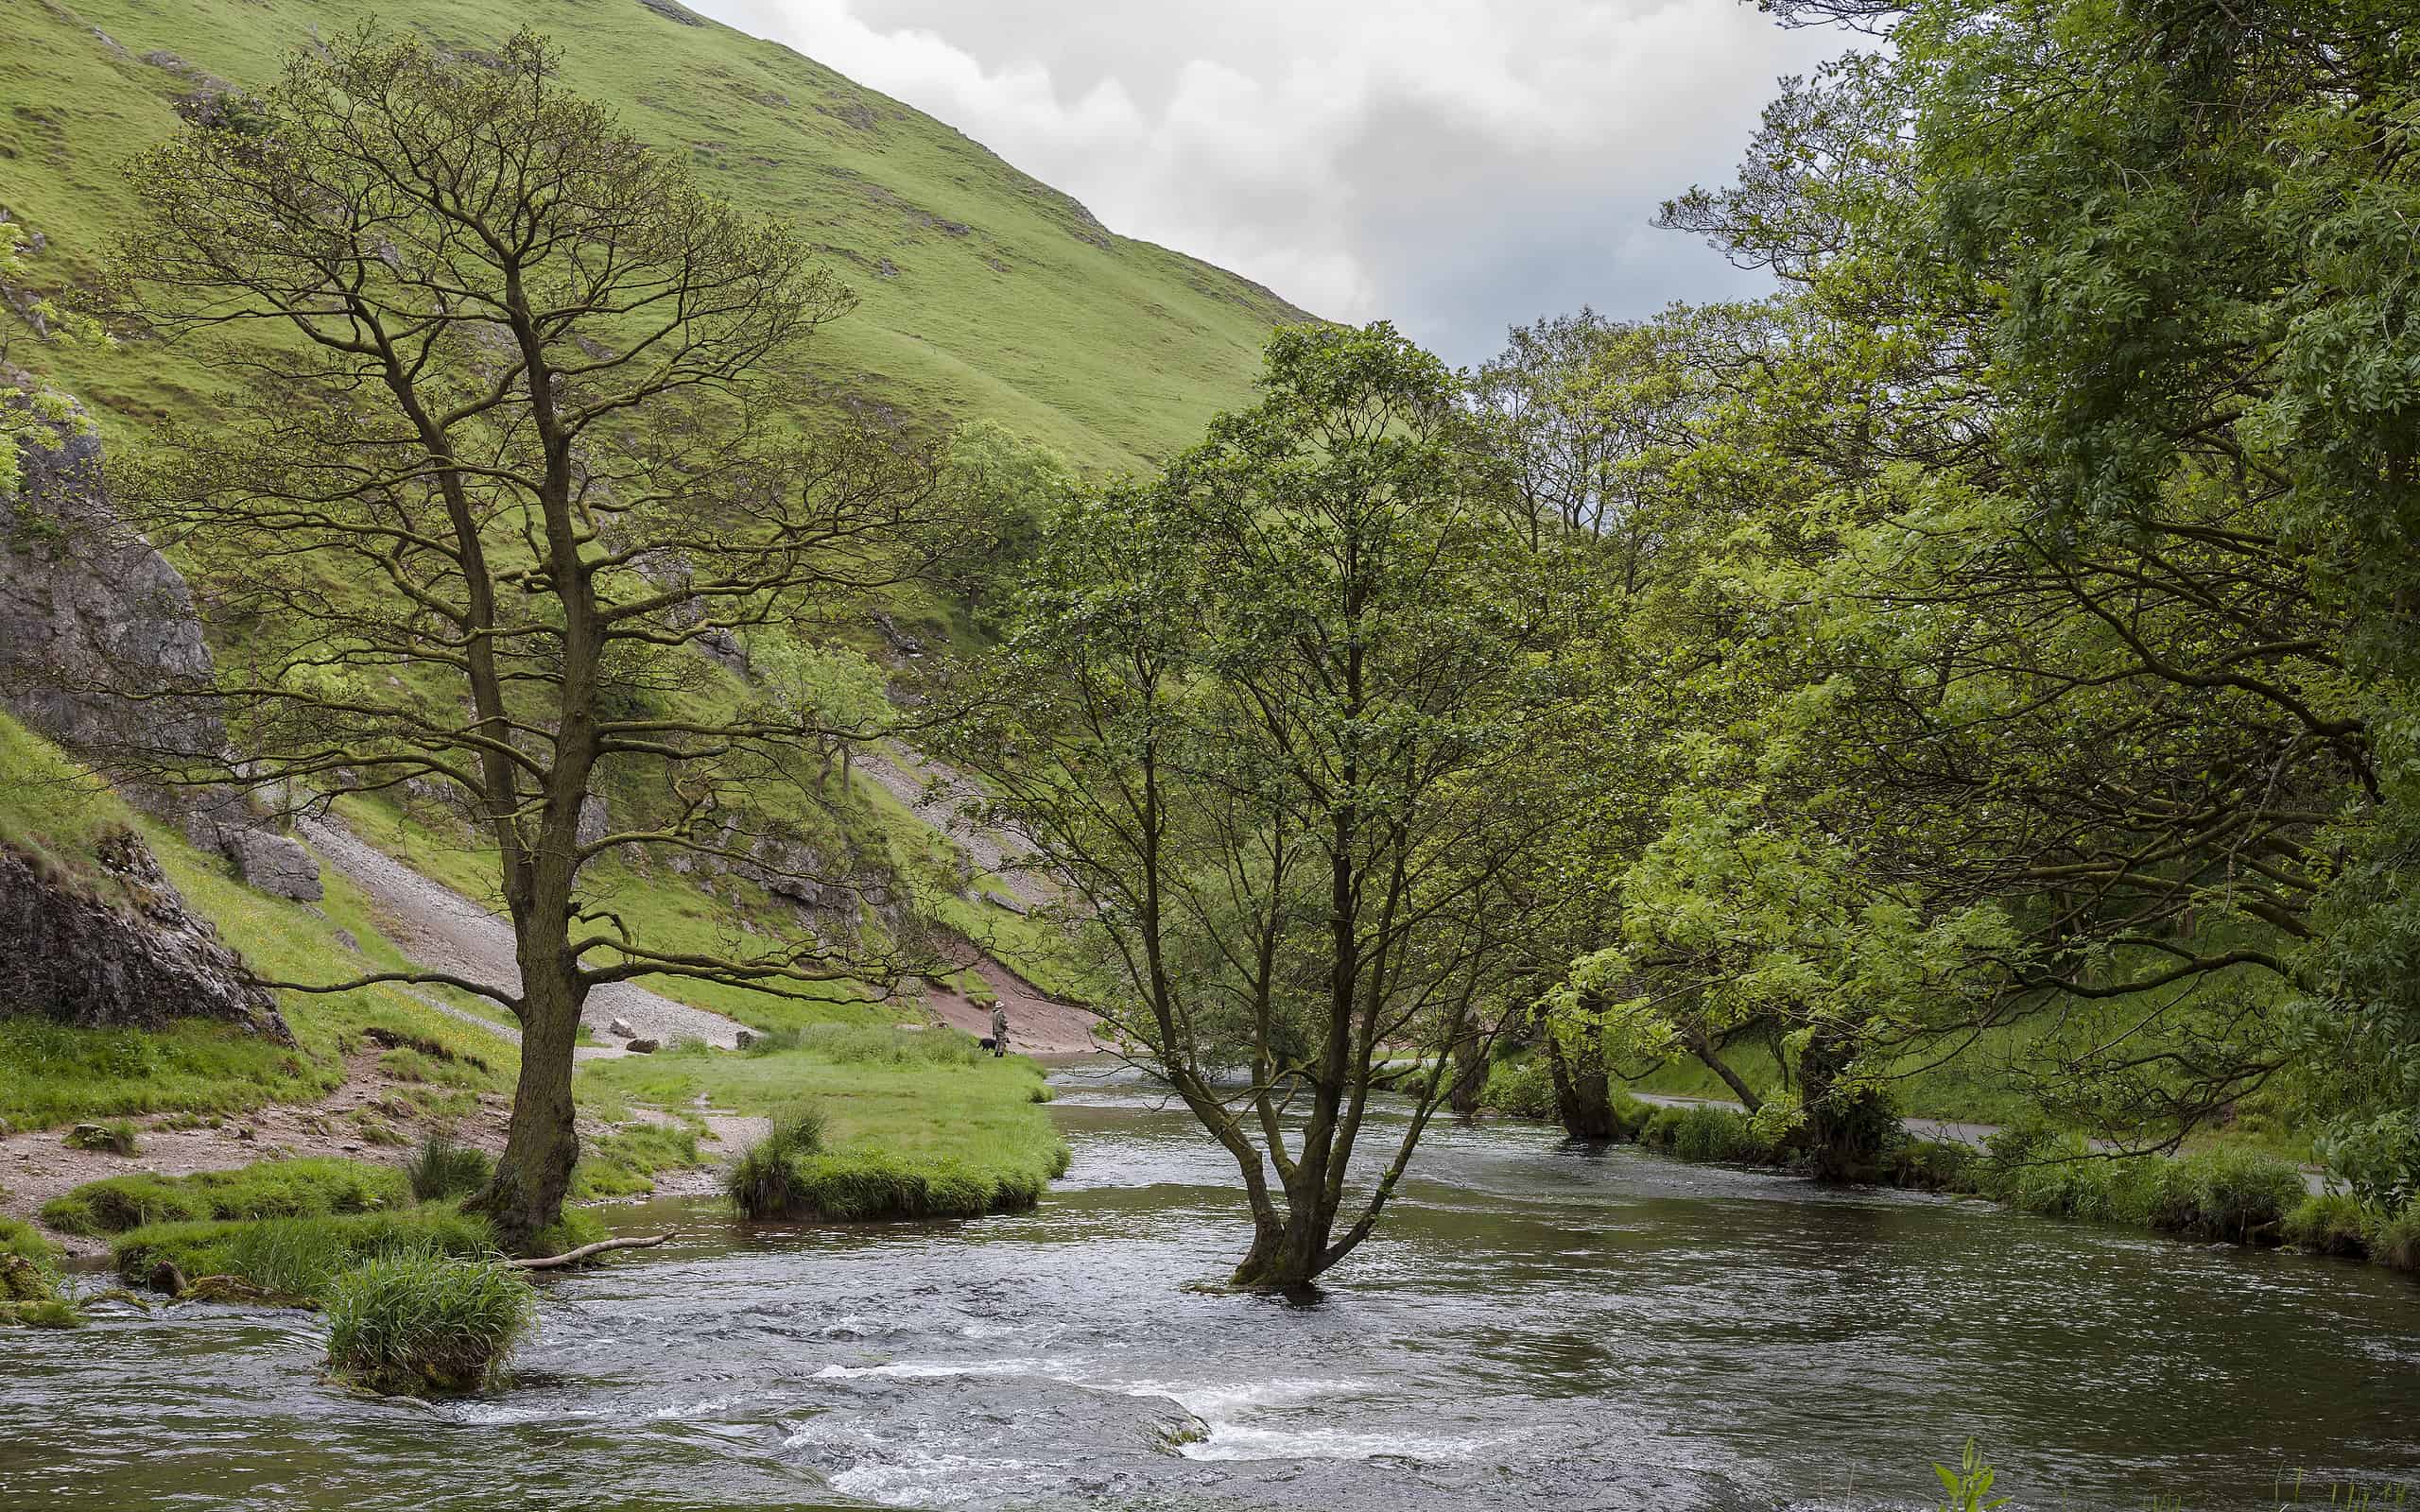 The River Dove, a famous trout stream in the Derbyshire Peak District, England